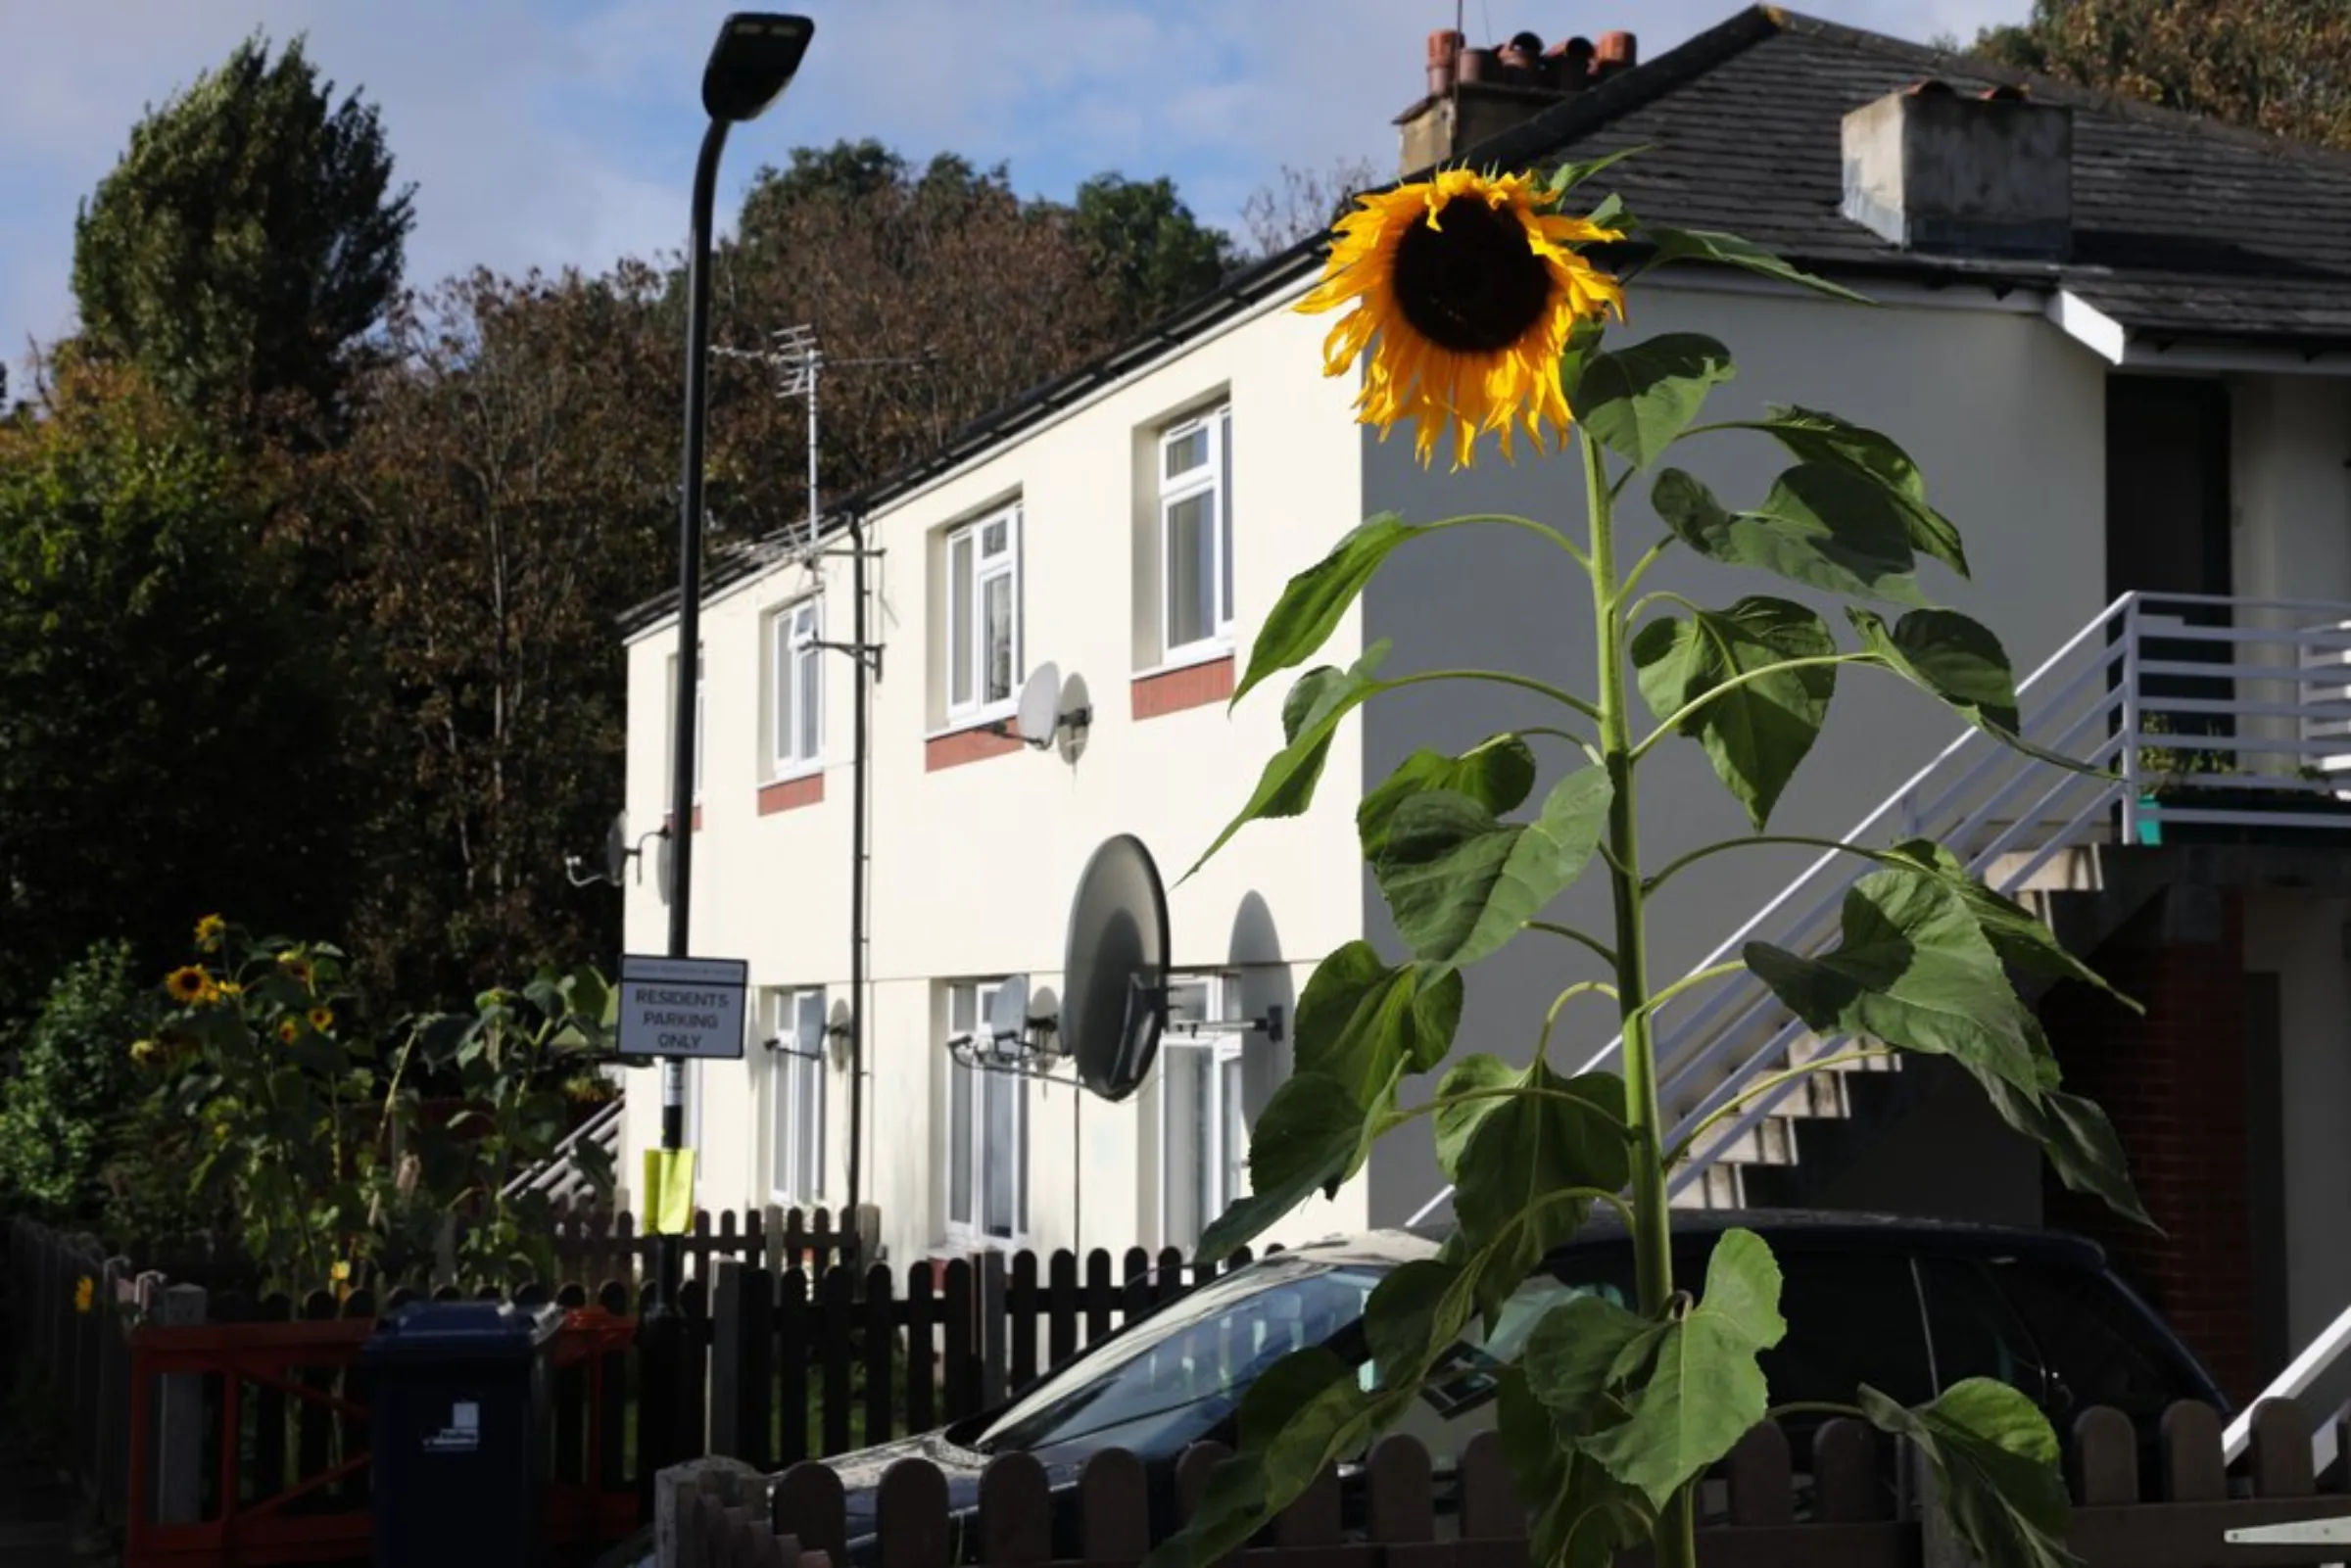 Sunflowers grow high in front of homes retrofitted with new exterior insulation in the Ealing borough of London, Britain, on October 21, 2021